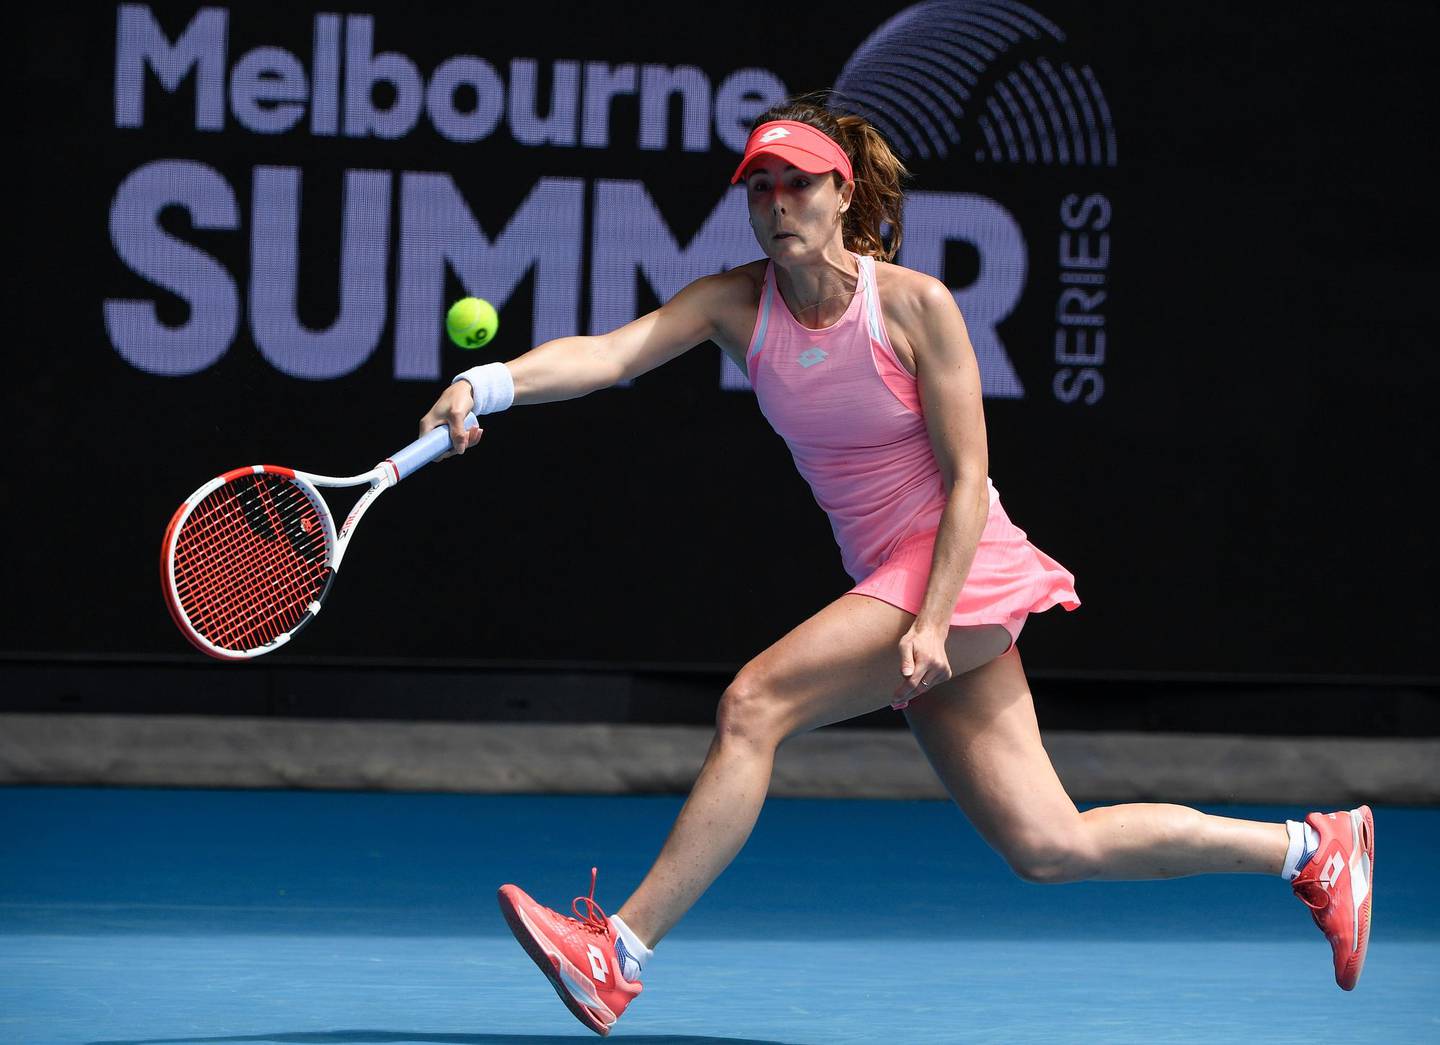 France's Alize Cornet makes a forehand return to Japan's Naomi Osaka during a tuneup tournament ahead of the Australian Open tennis championships in Melbourne, Australia, Tuesday, Feb. 2, 2021. (AP Photo/Andrew Brownbill)